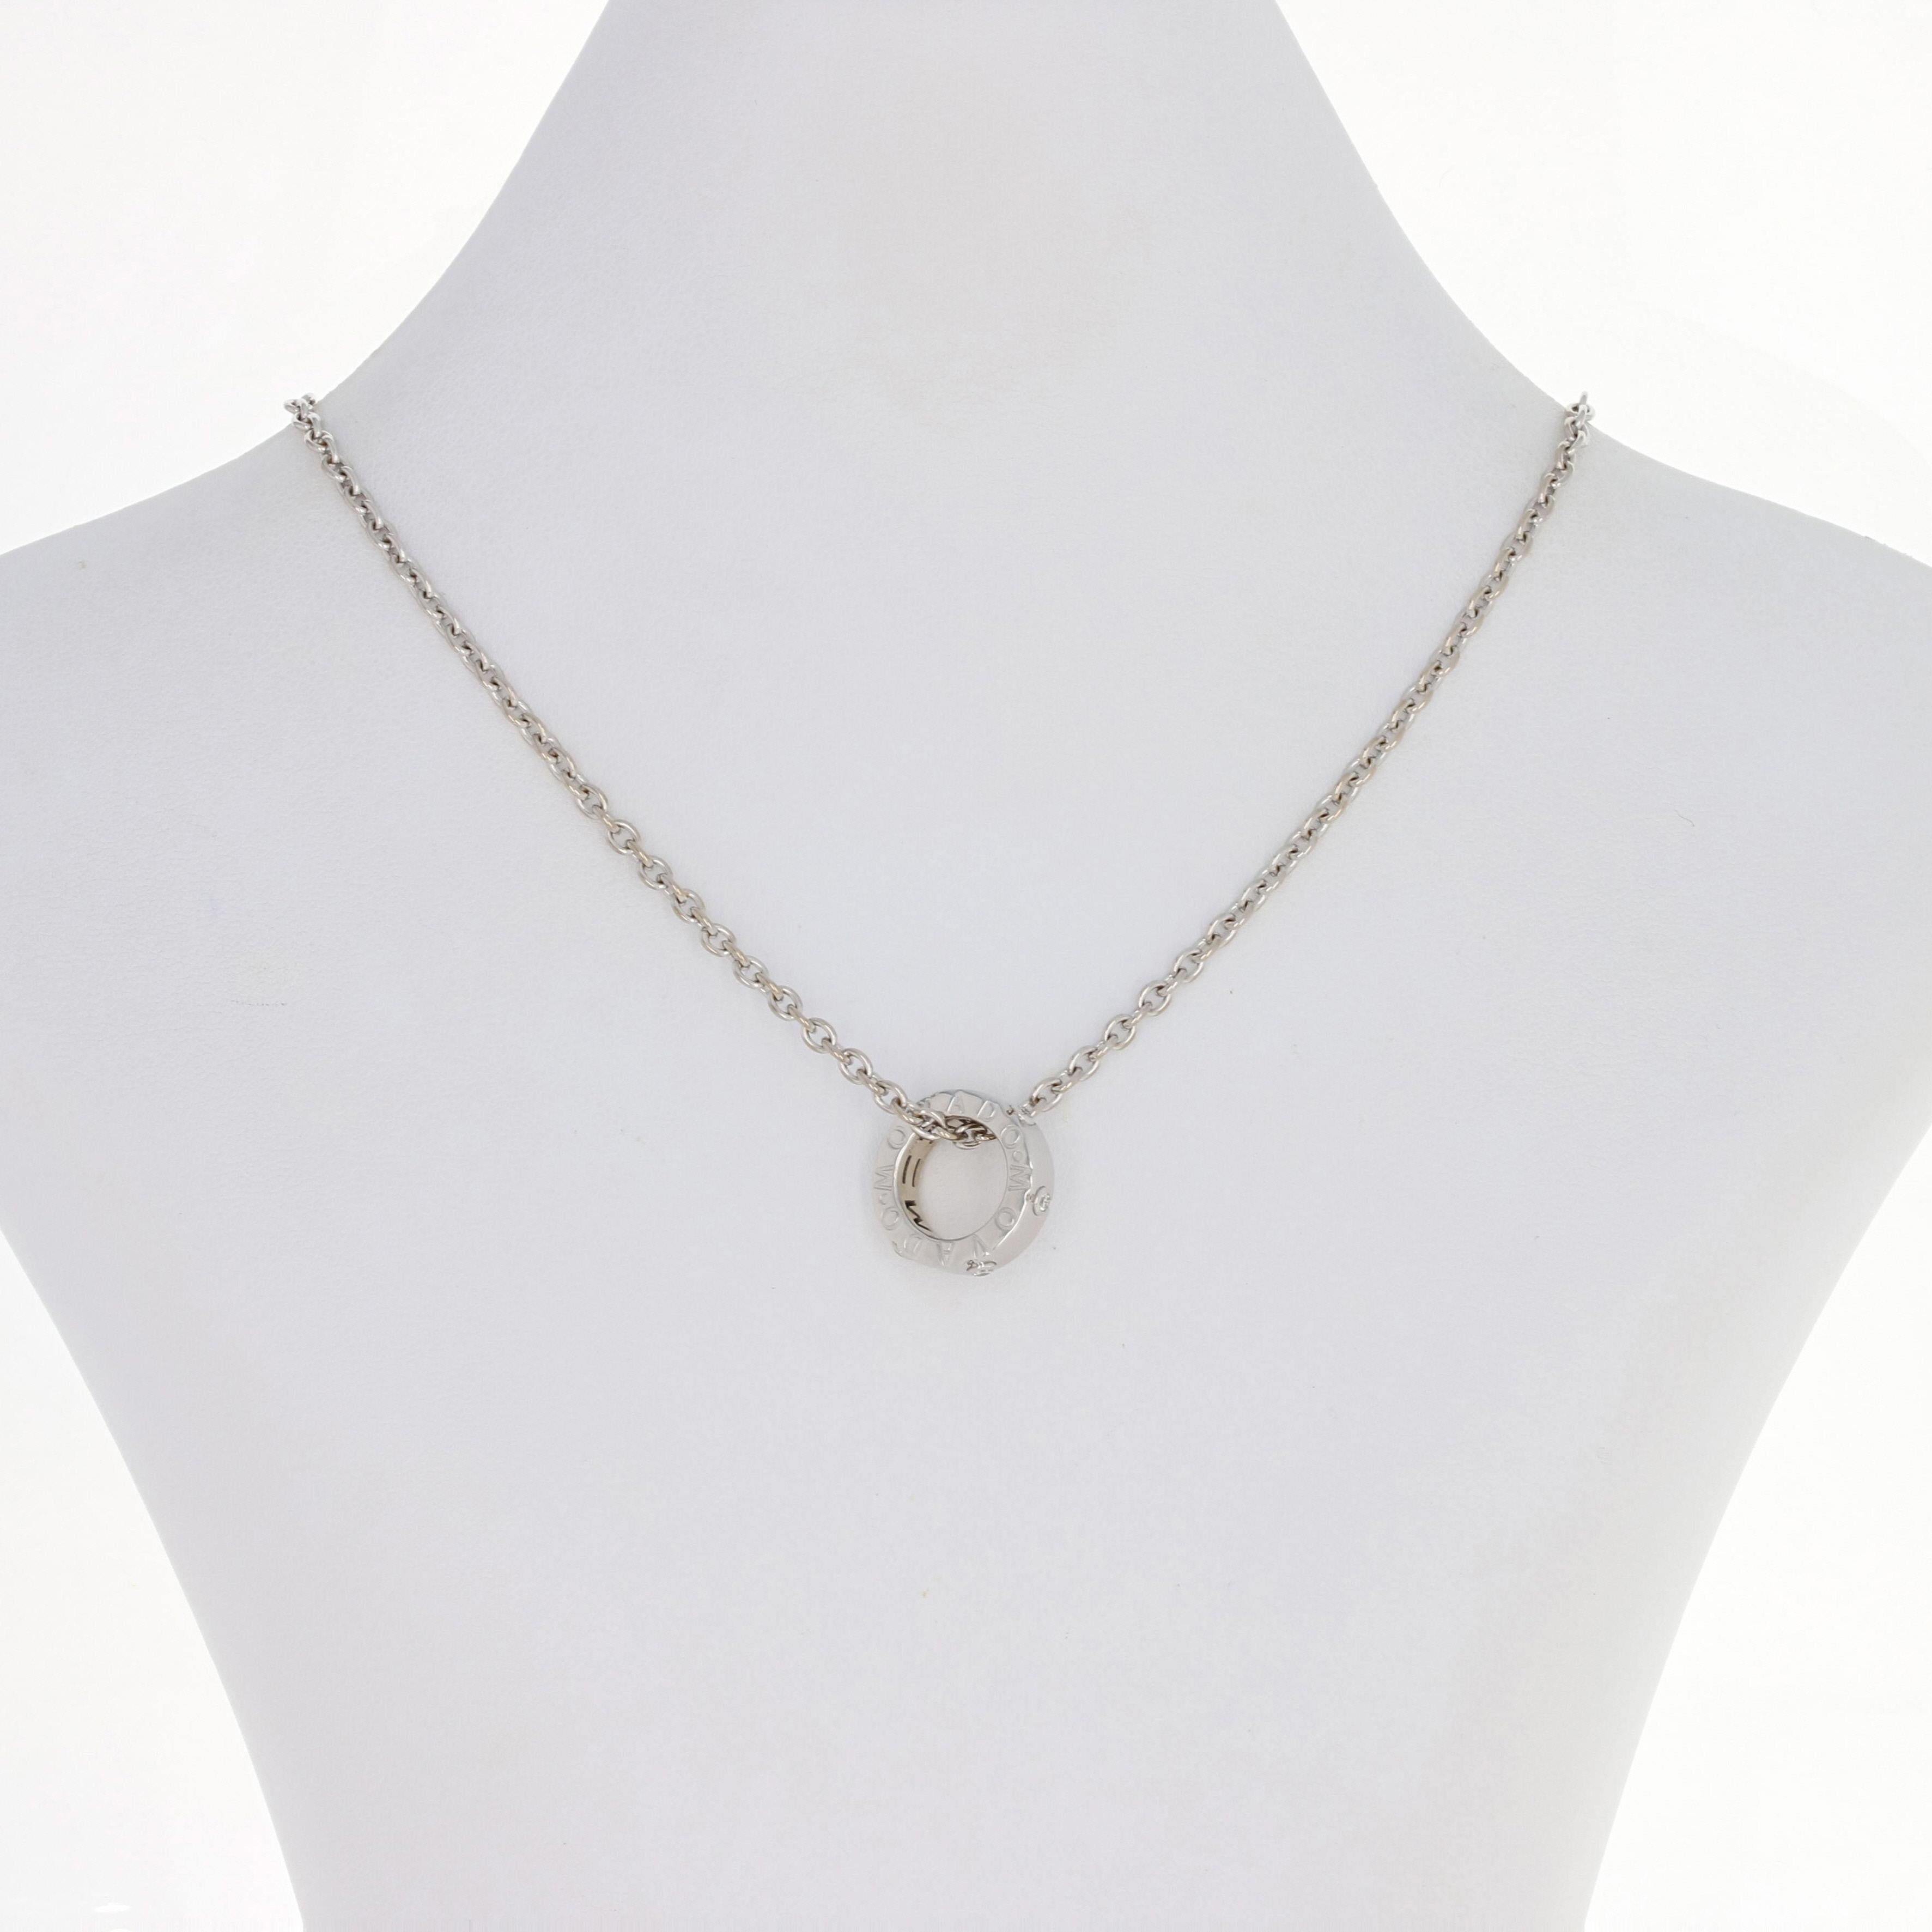 Add an extra touch of sparkle to your day with this beautiful necklace! Crafted by Movado in 18k white gold, this cable chain necklace elegantly showcases a signature Movado pendant accented by glistening diamonds.  

Metal Content: Guaranteed 18k